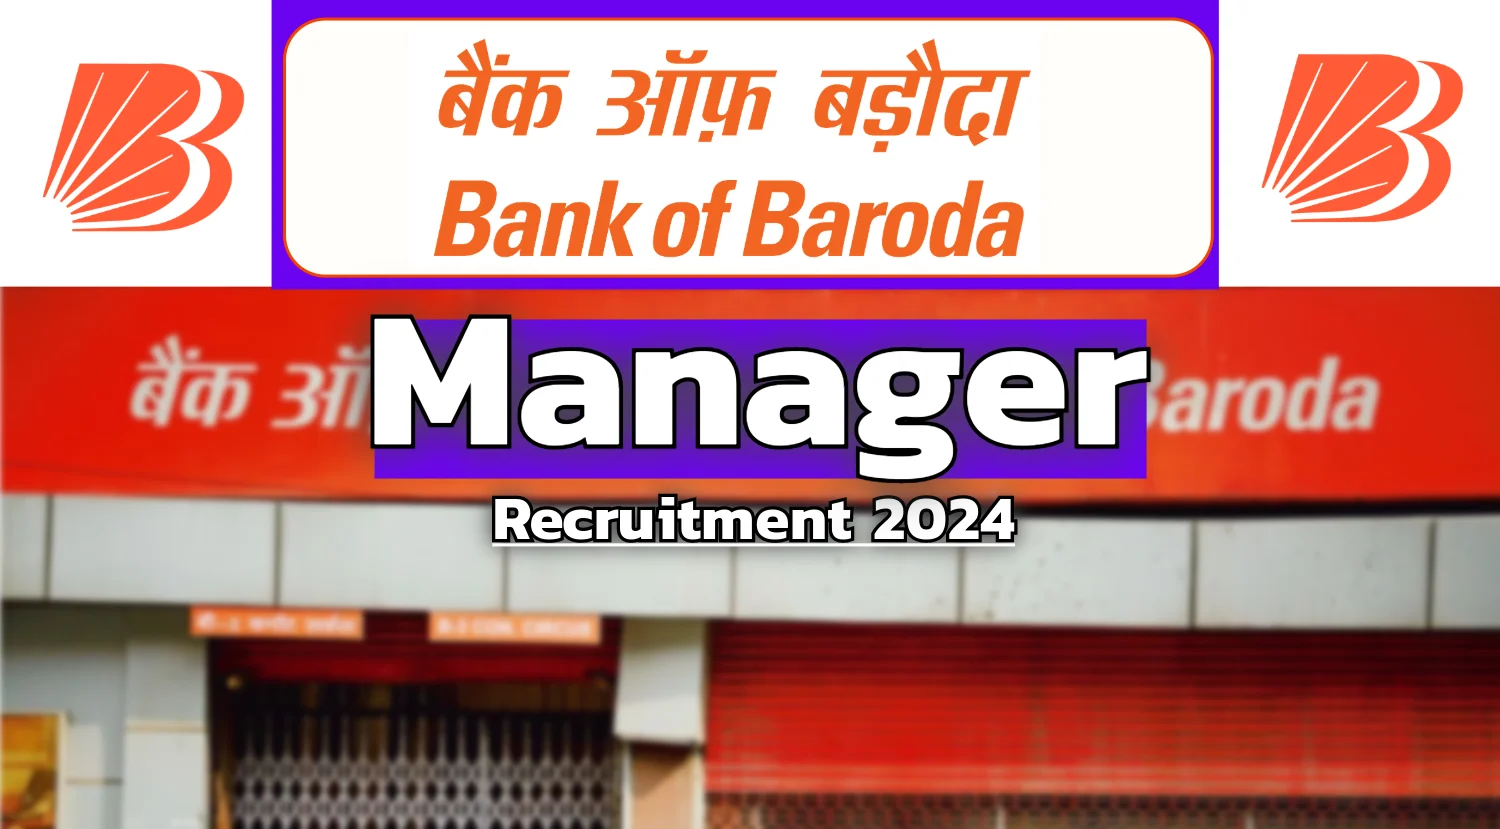 Bank of Baroda Manager Recruitment 2024 Notification Out - Salary Up to 89890, Check Vacancies, Eligibility and How to Apply Now